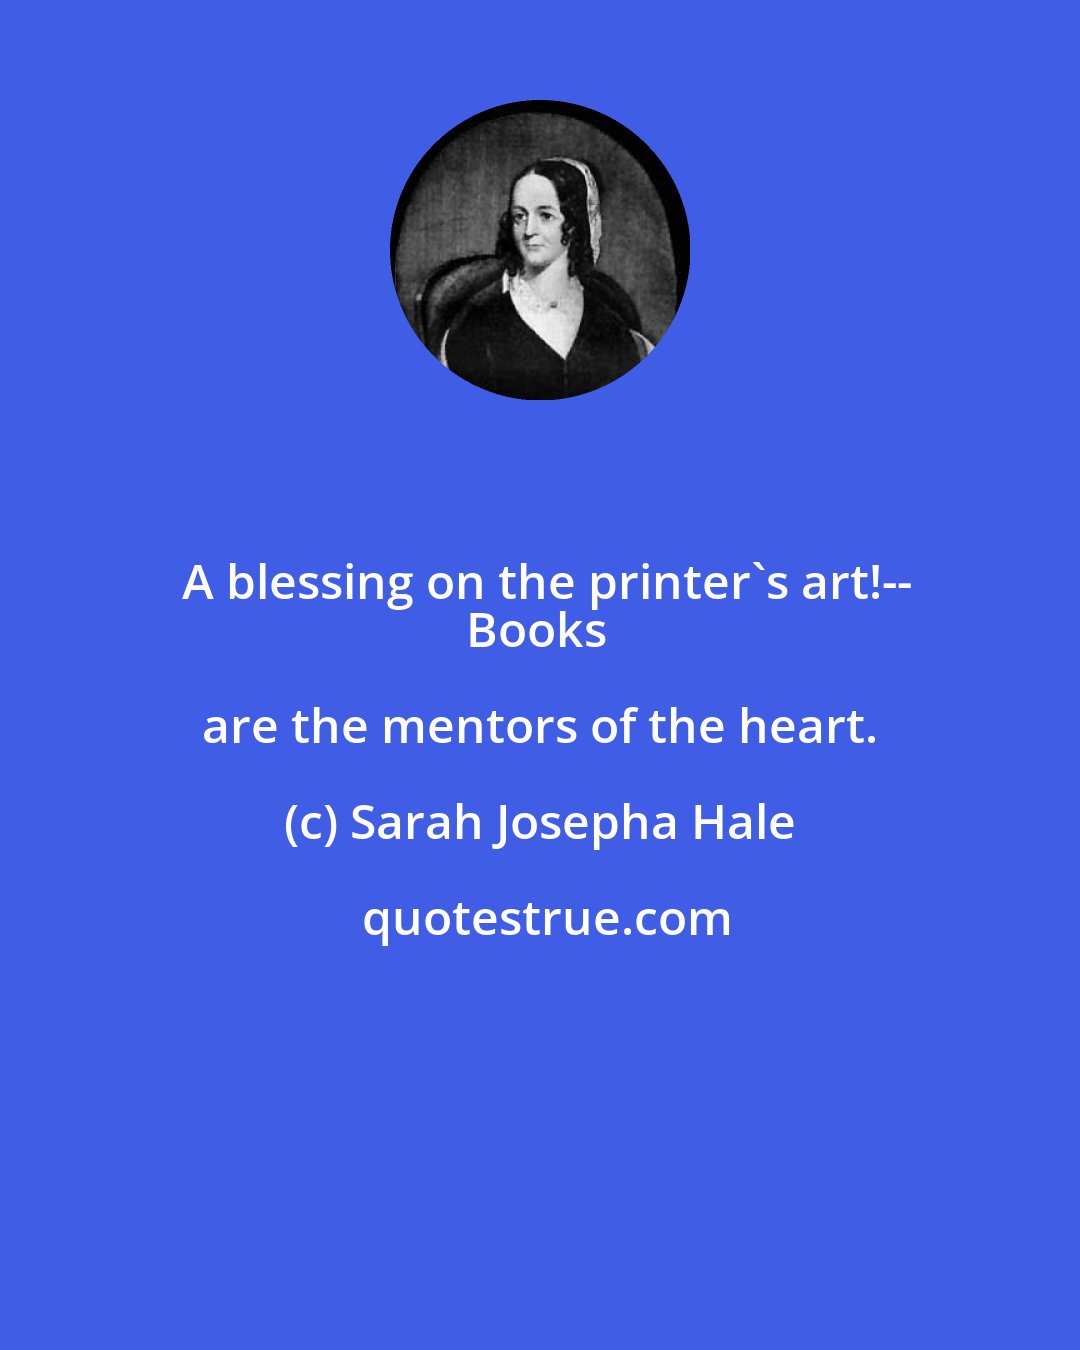 Sarah Josepha Hale: A blessing on the printer's art!--
Books are the mentors of the heart.